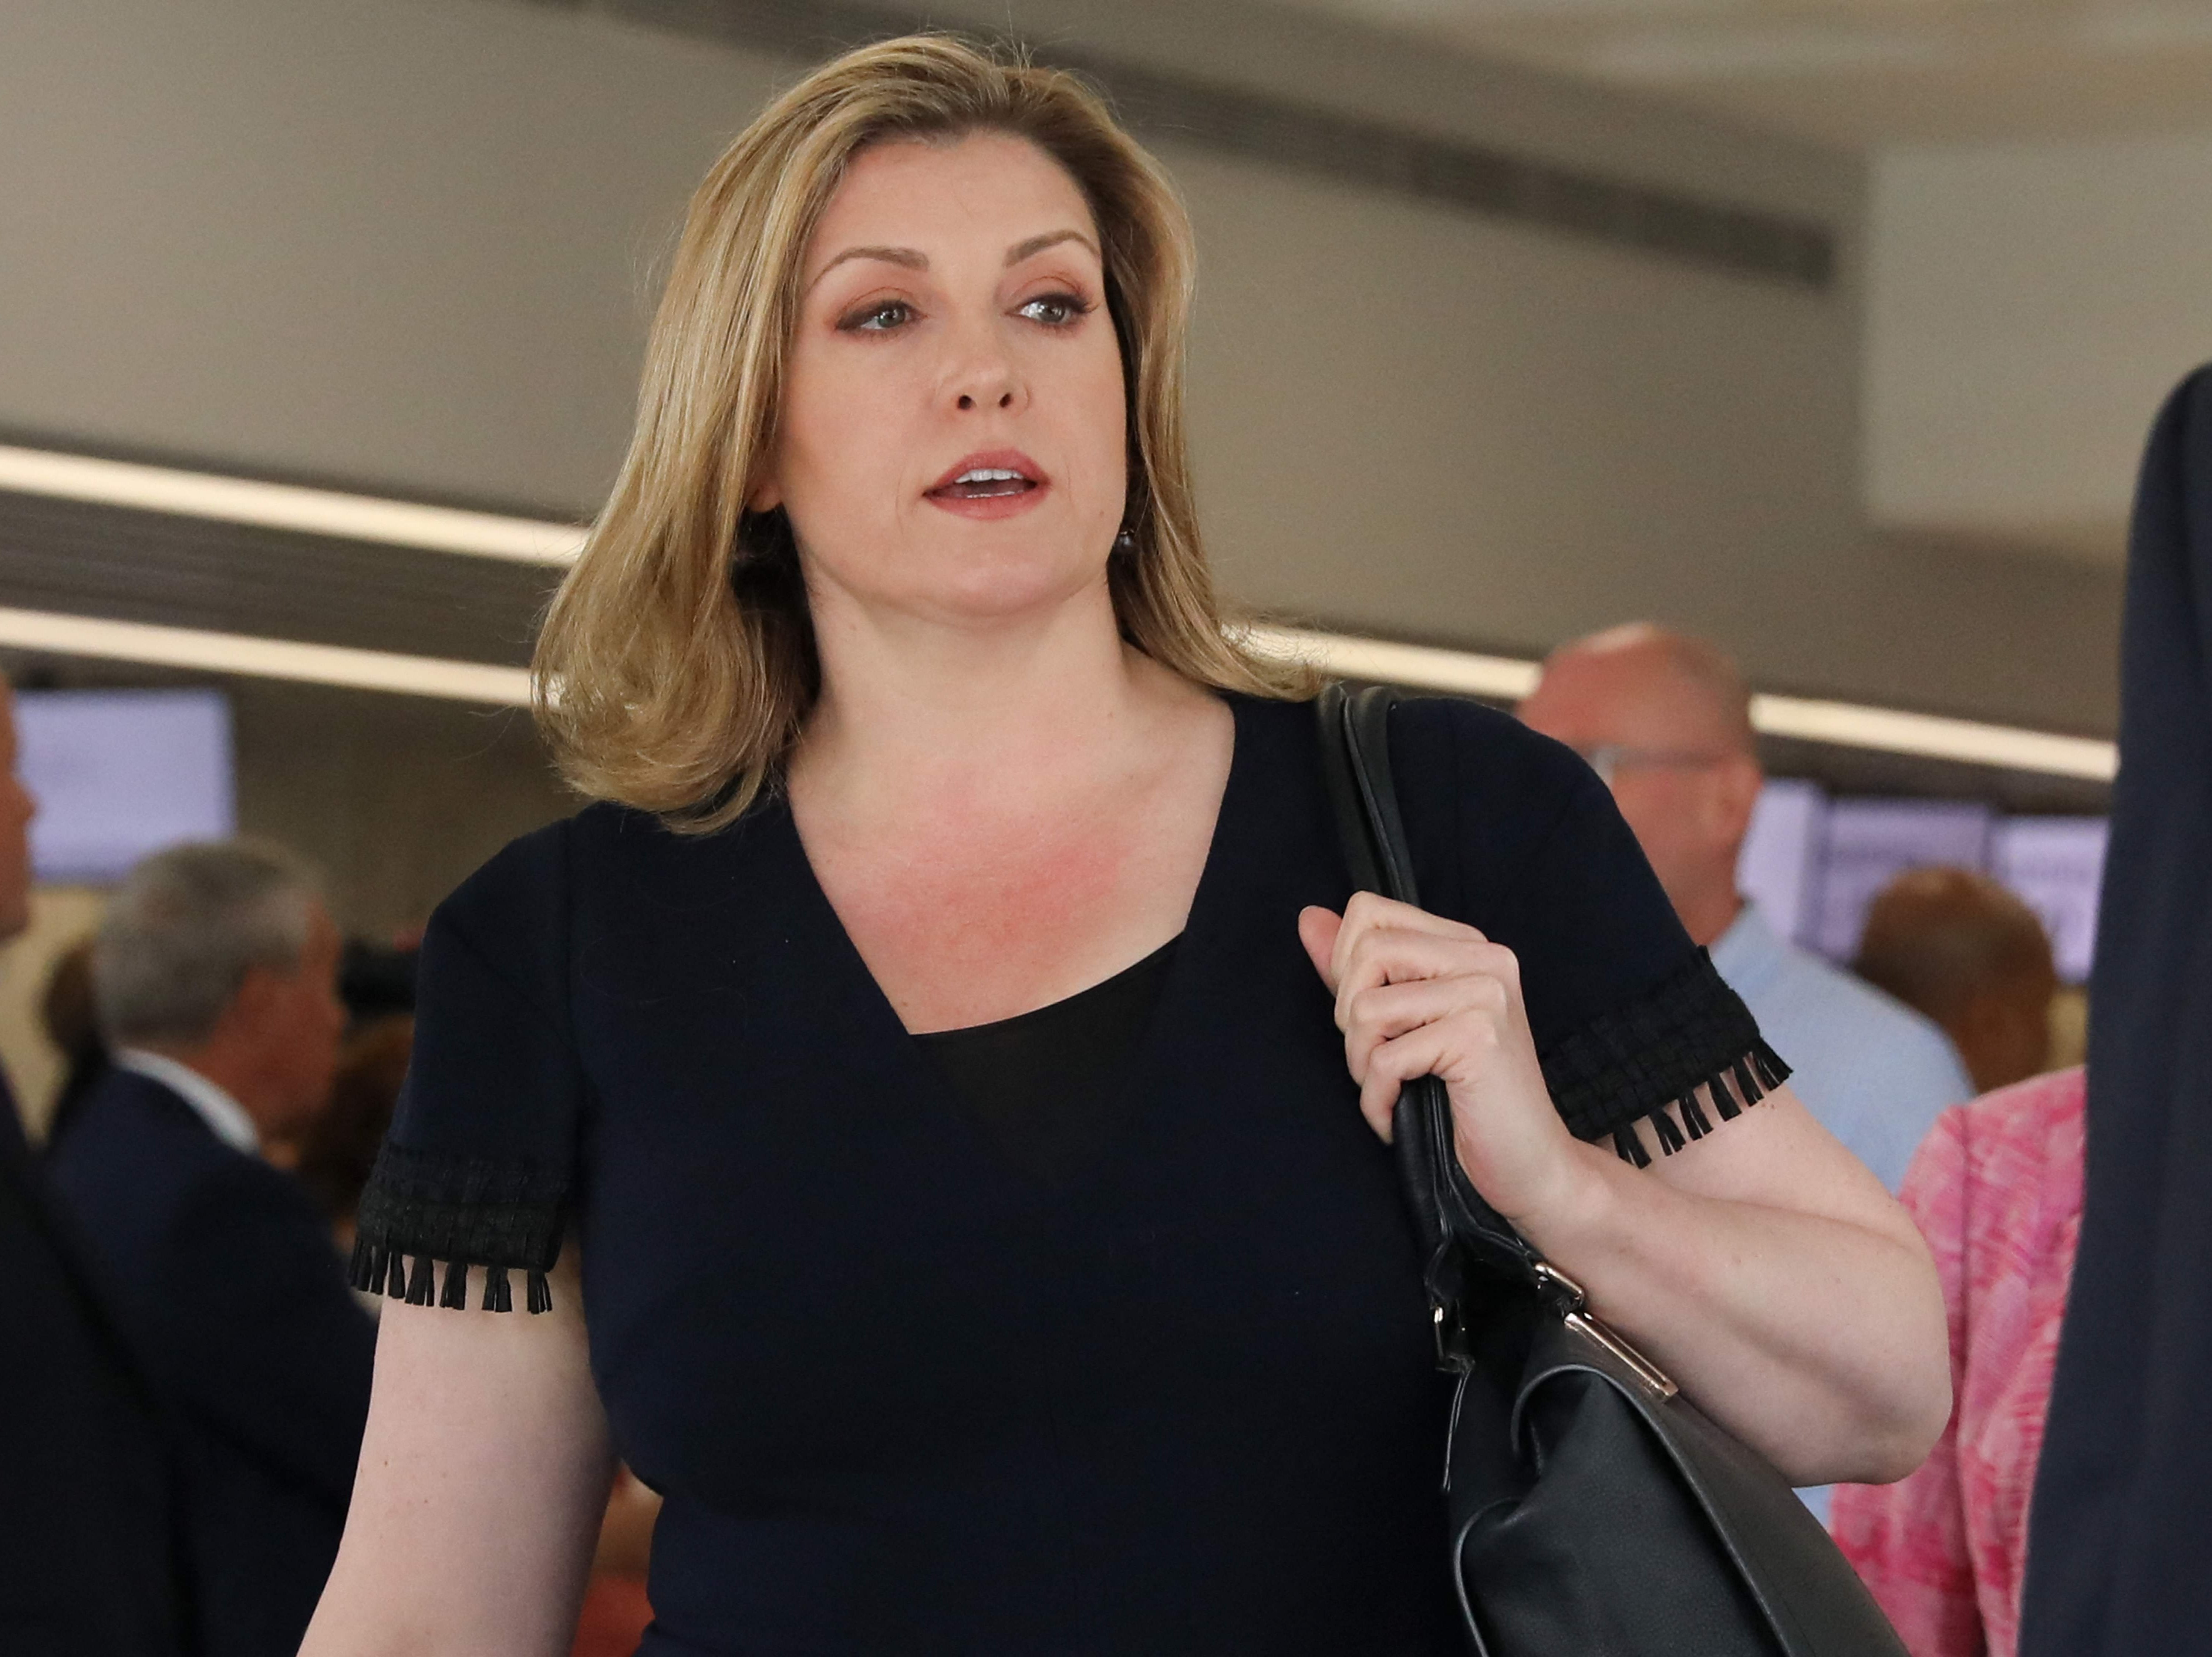 Trade minister Penny Mordaunt made waves in 2014 when she appeared on ITV’s celebrity diving show Splash!